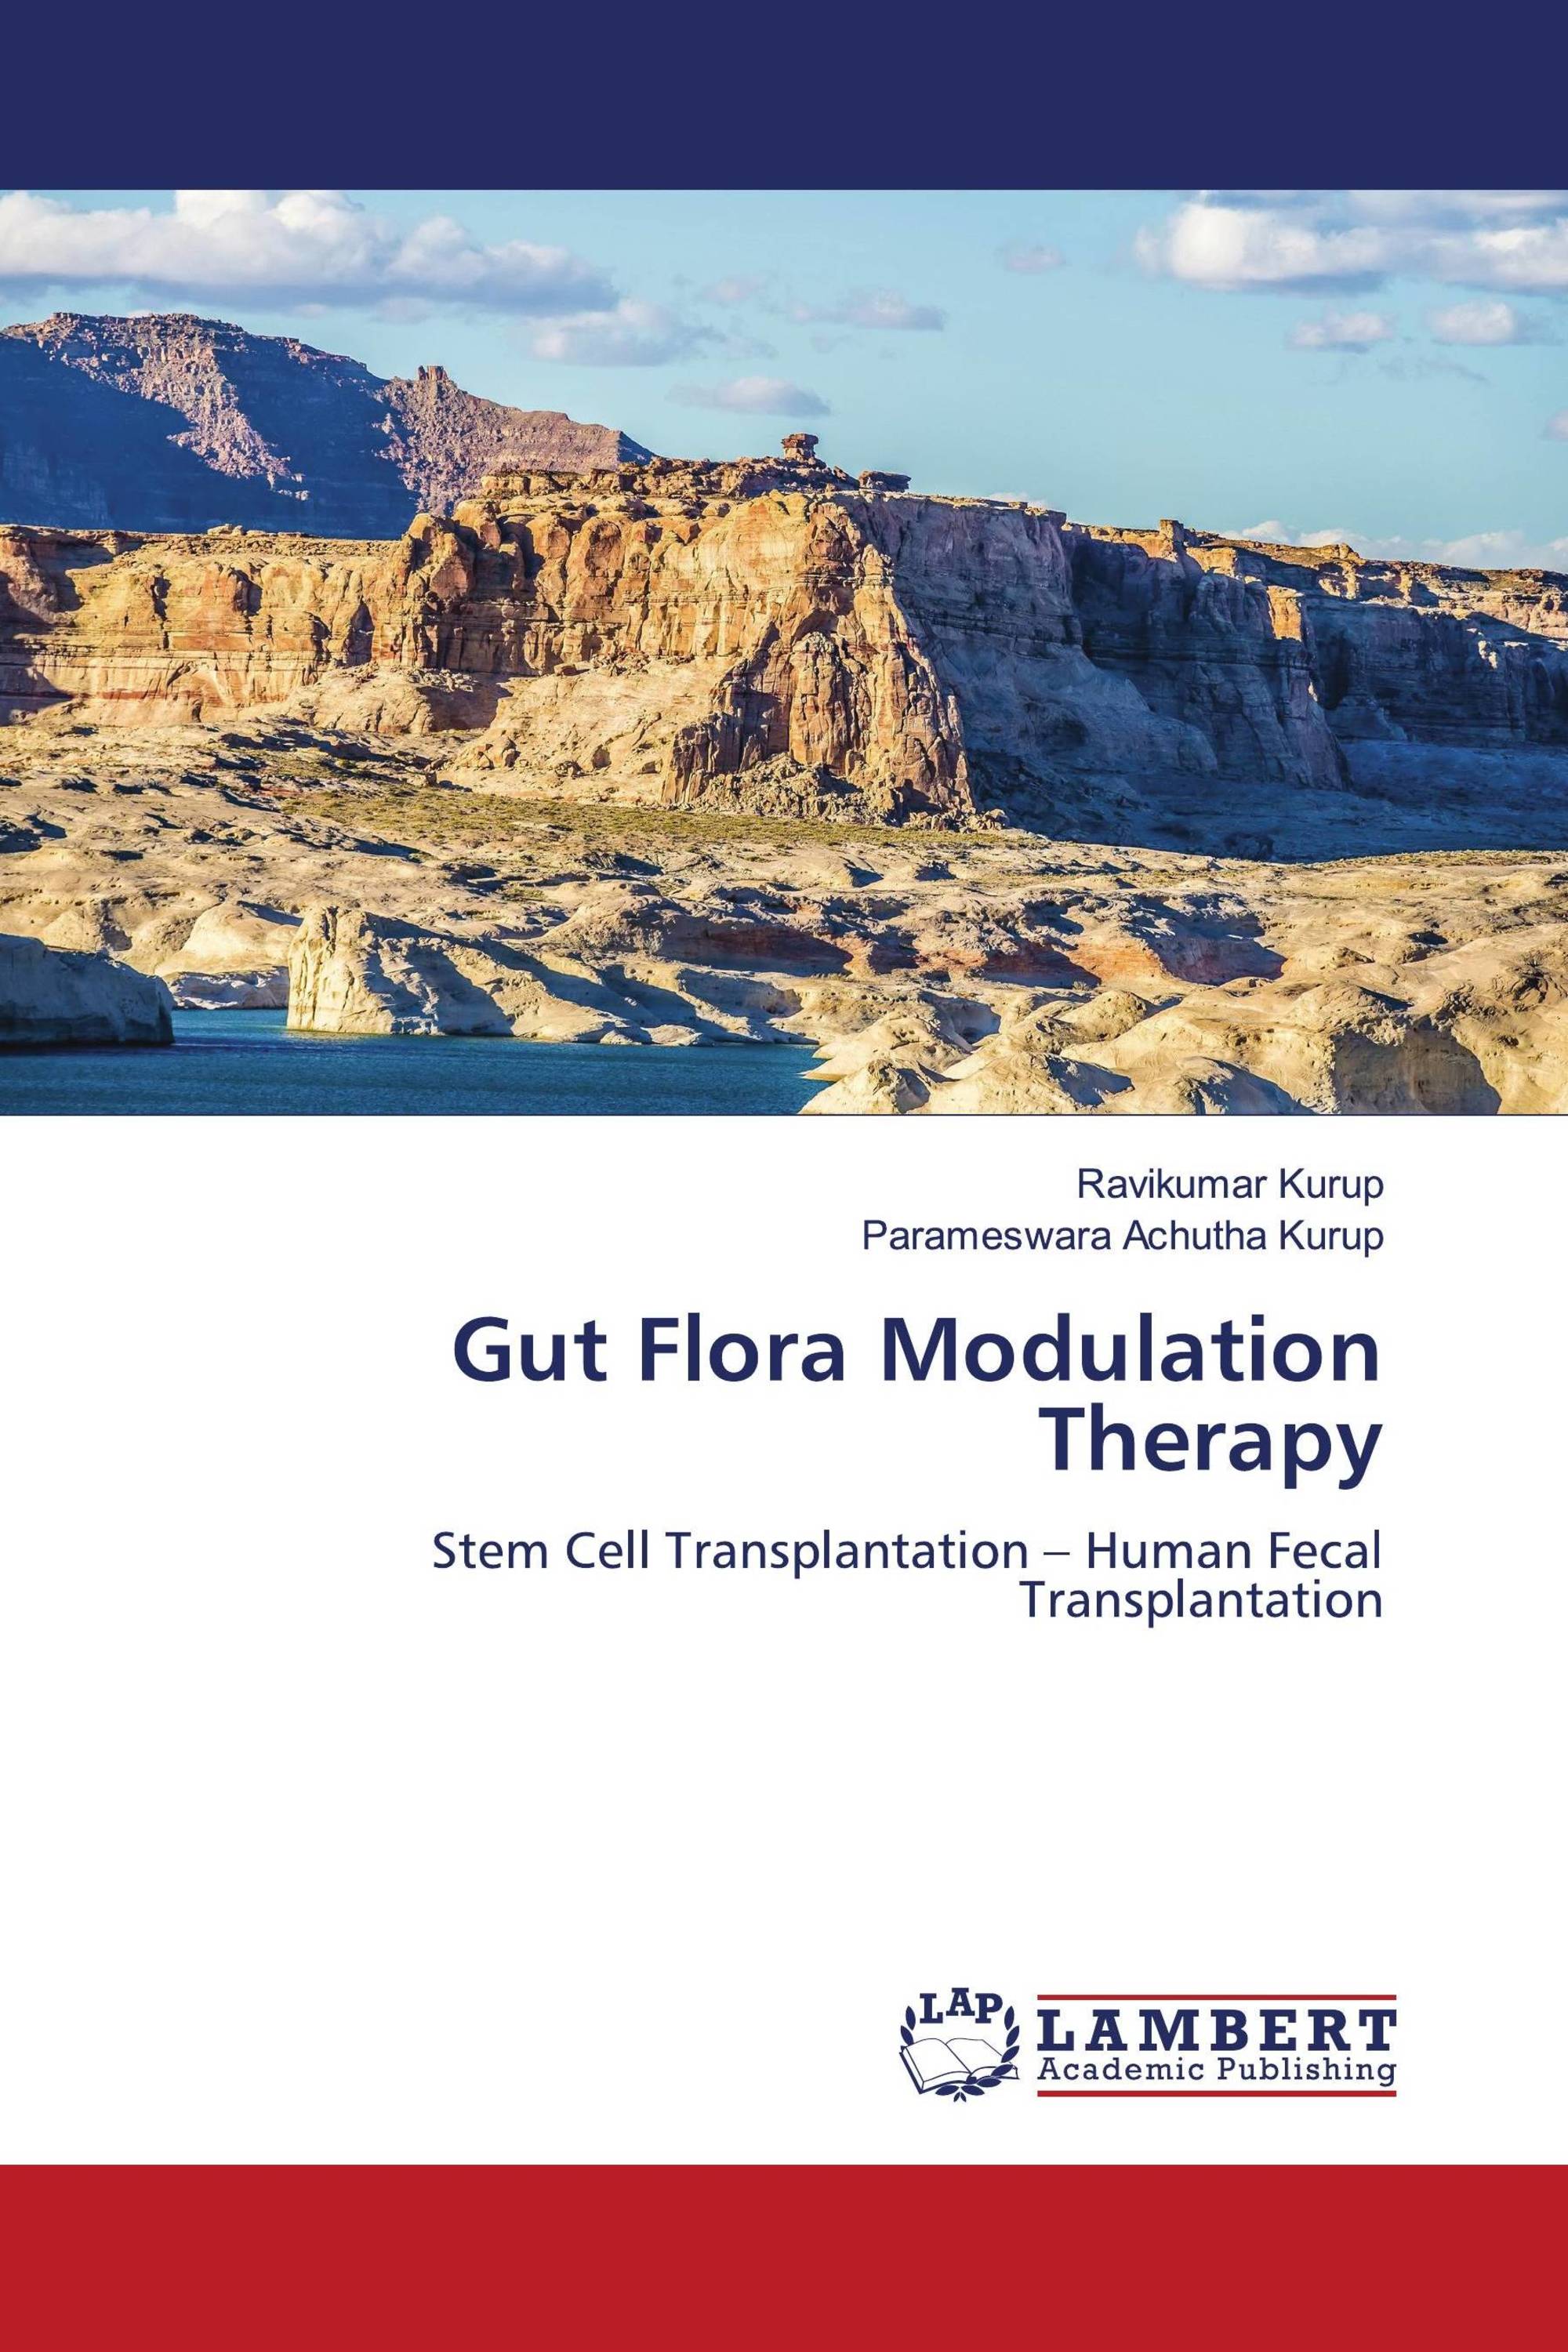 Gut Flora Modulation Therapy